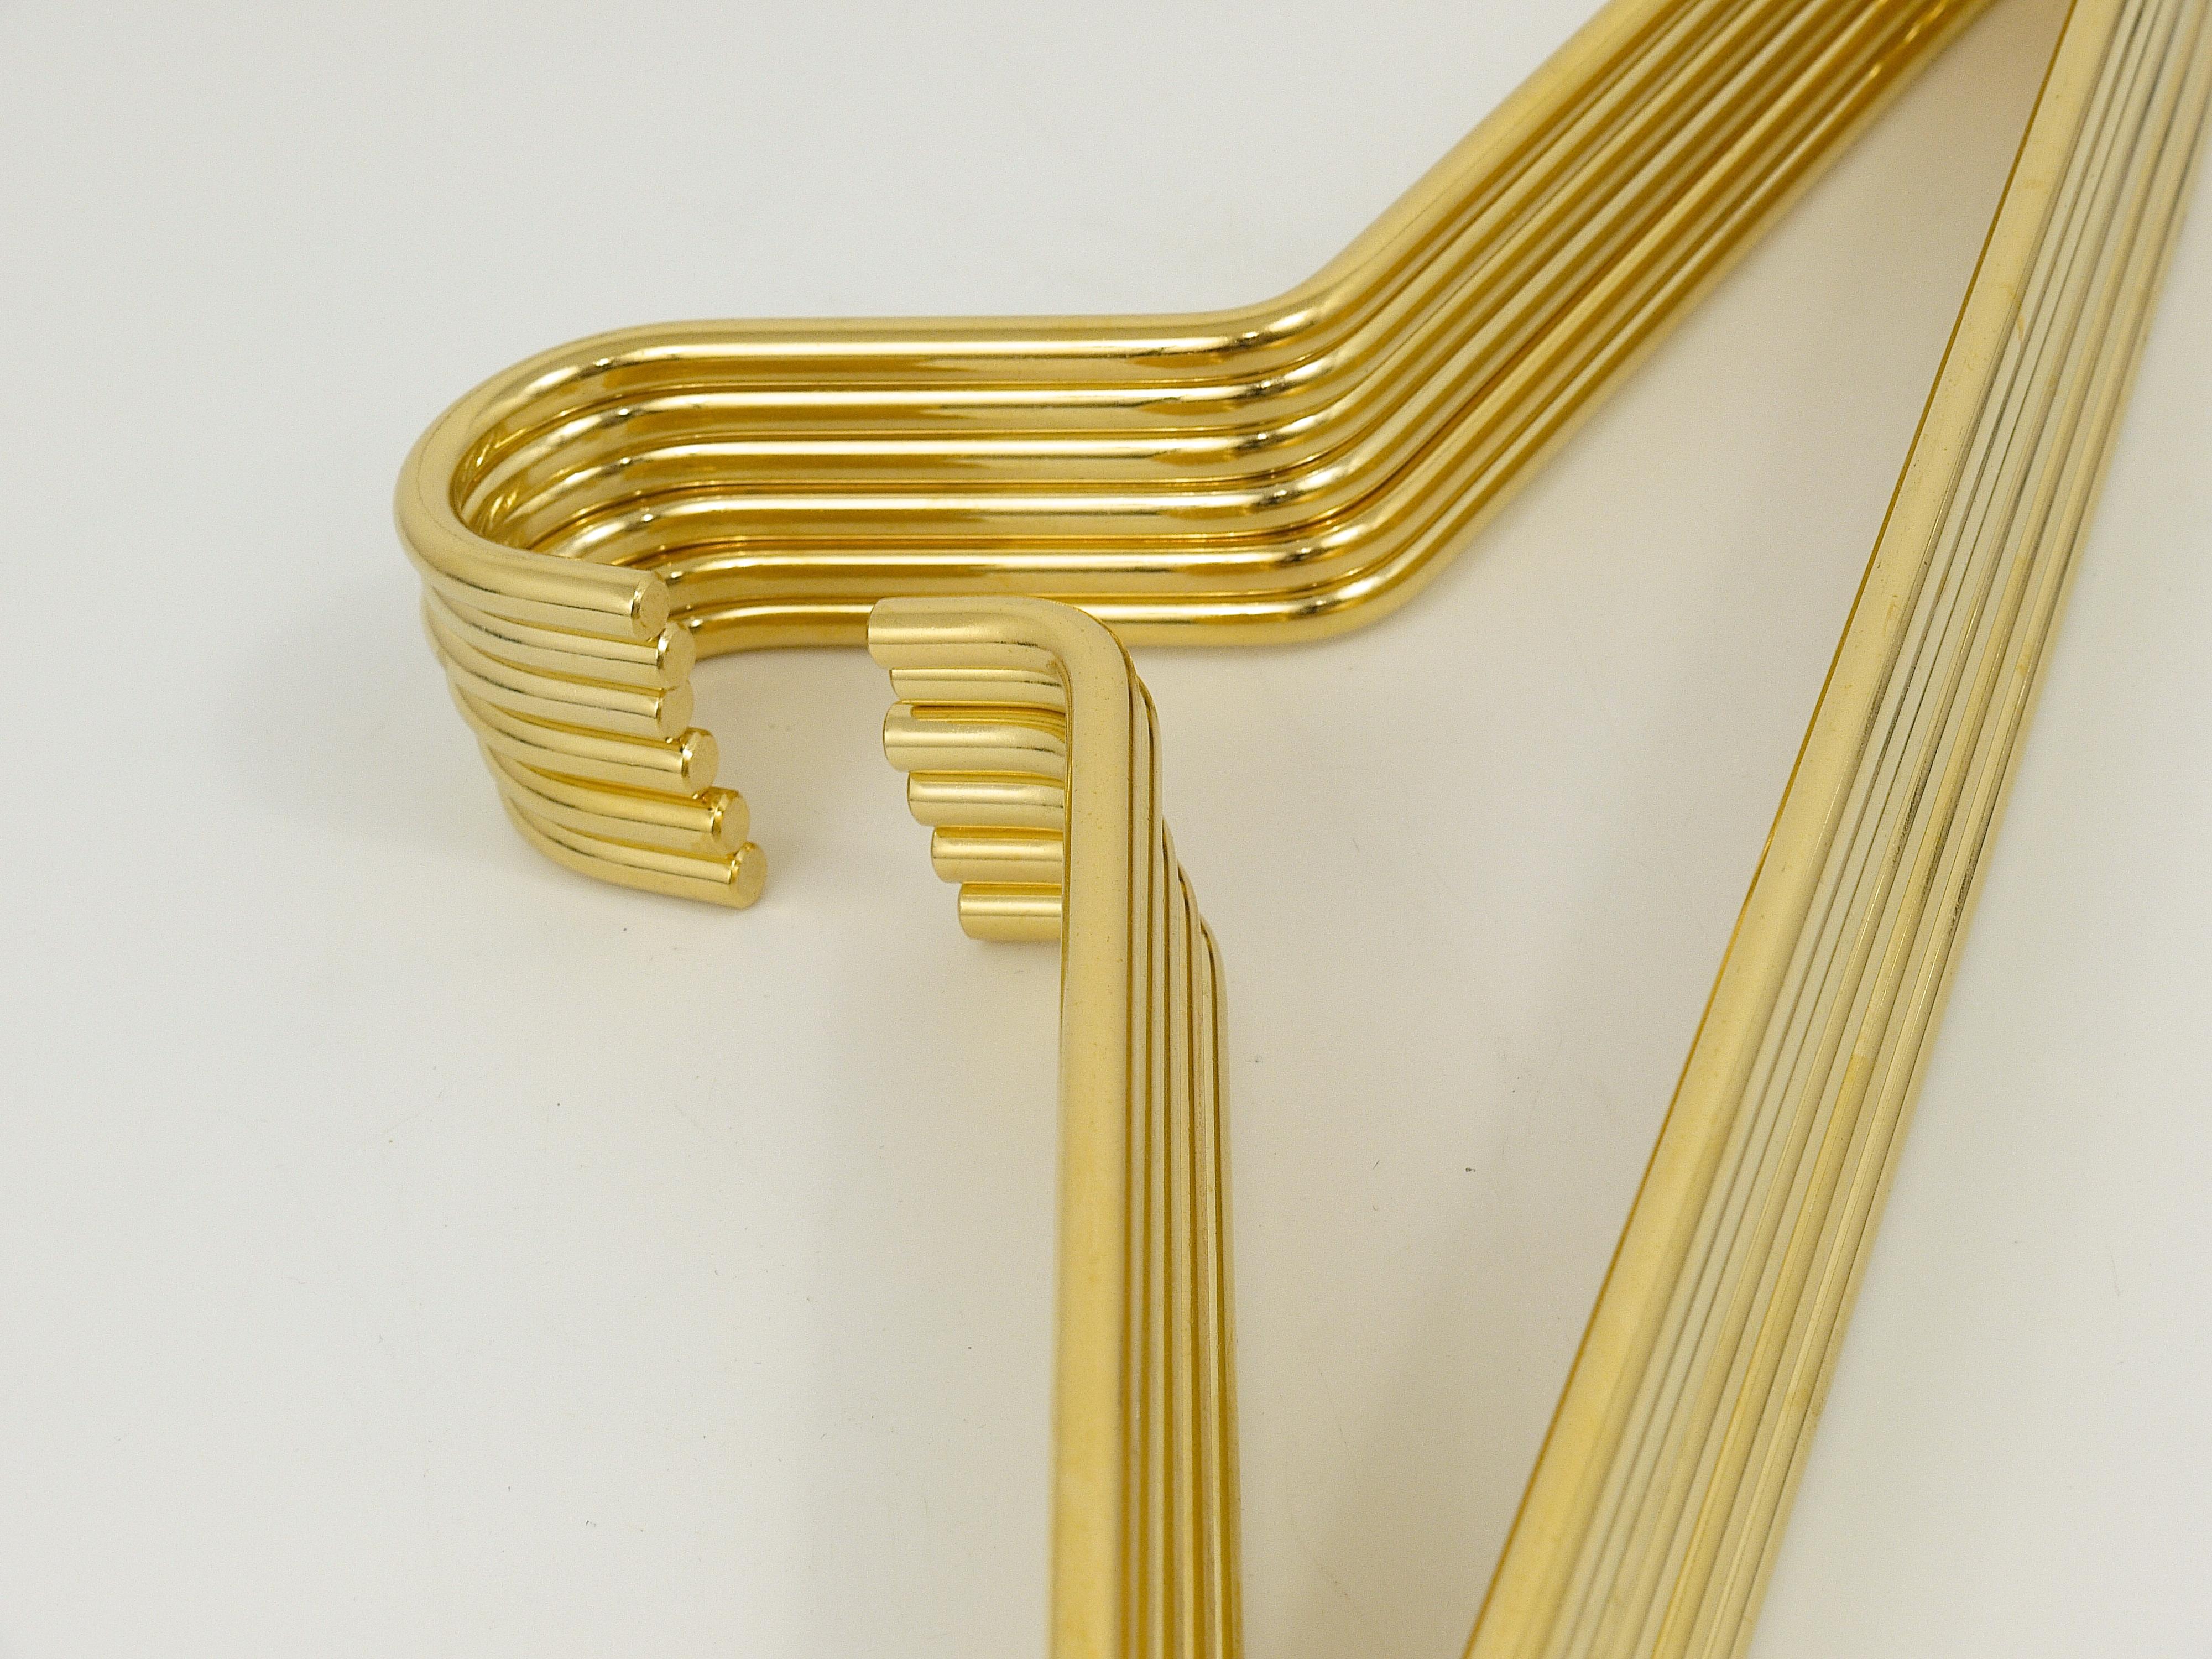 20th Century Up to 12 Austrian Modernist Solid Gold-Plated Coat Hangers from the 1970s For Sale